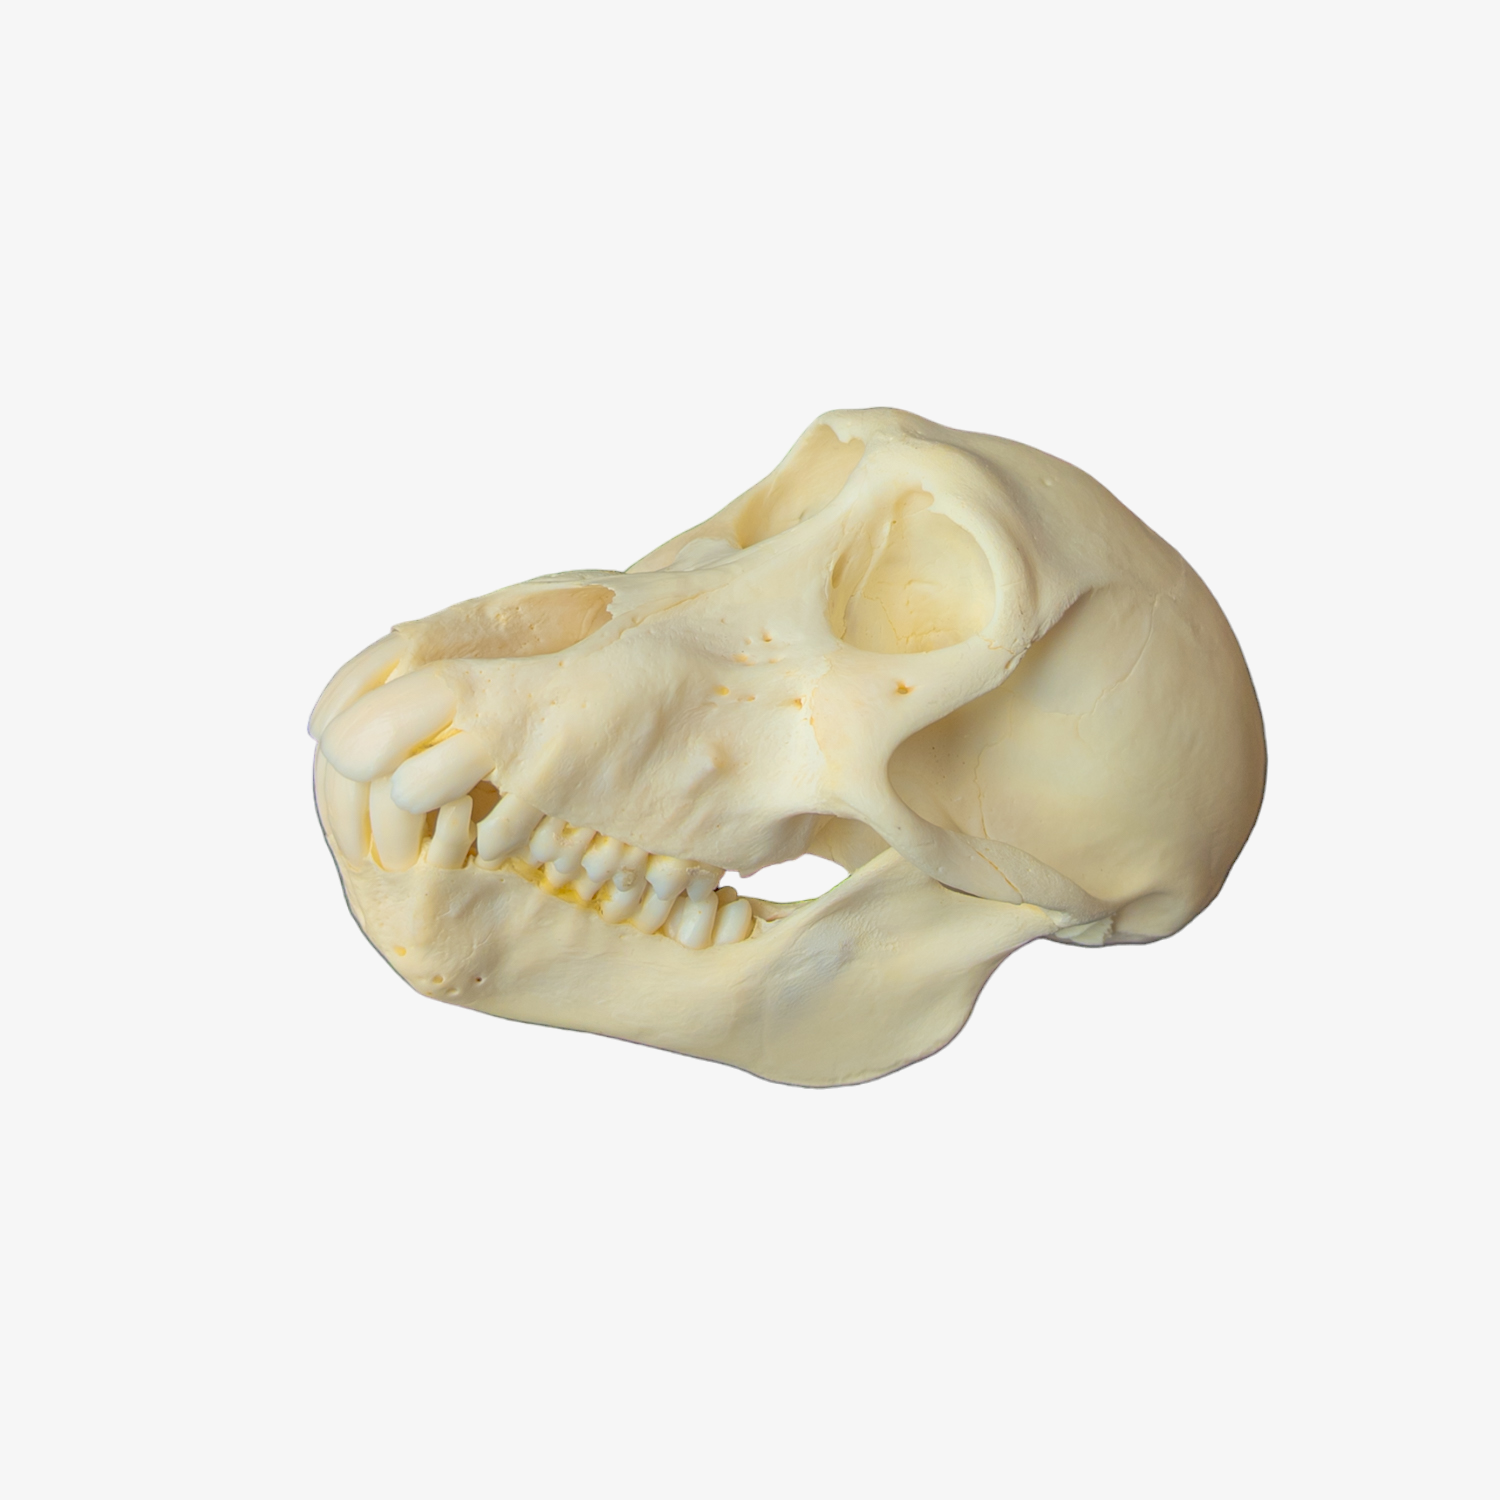 Adult Female Chacma Baboon Skull (Discounted)